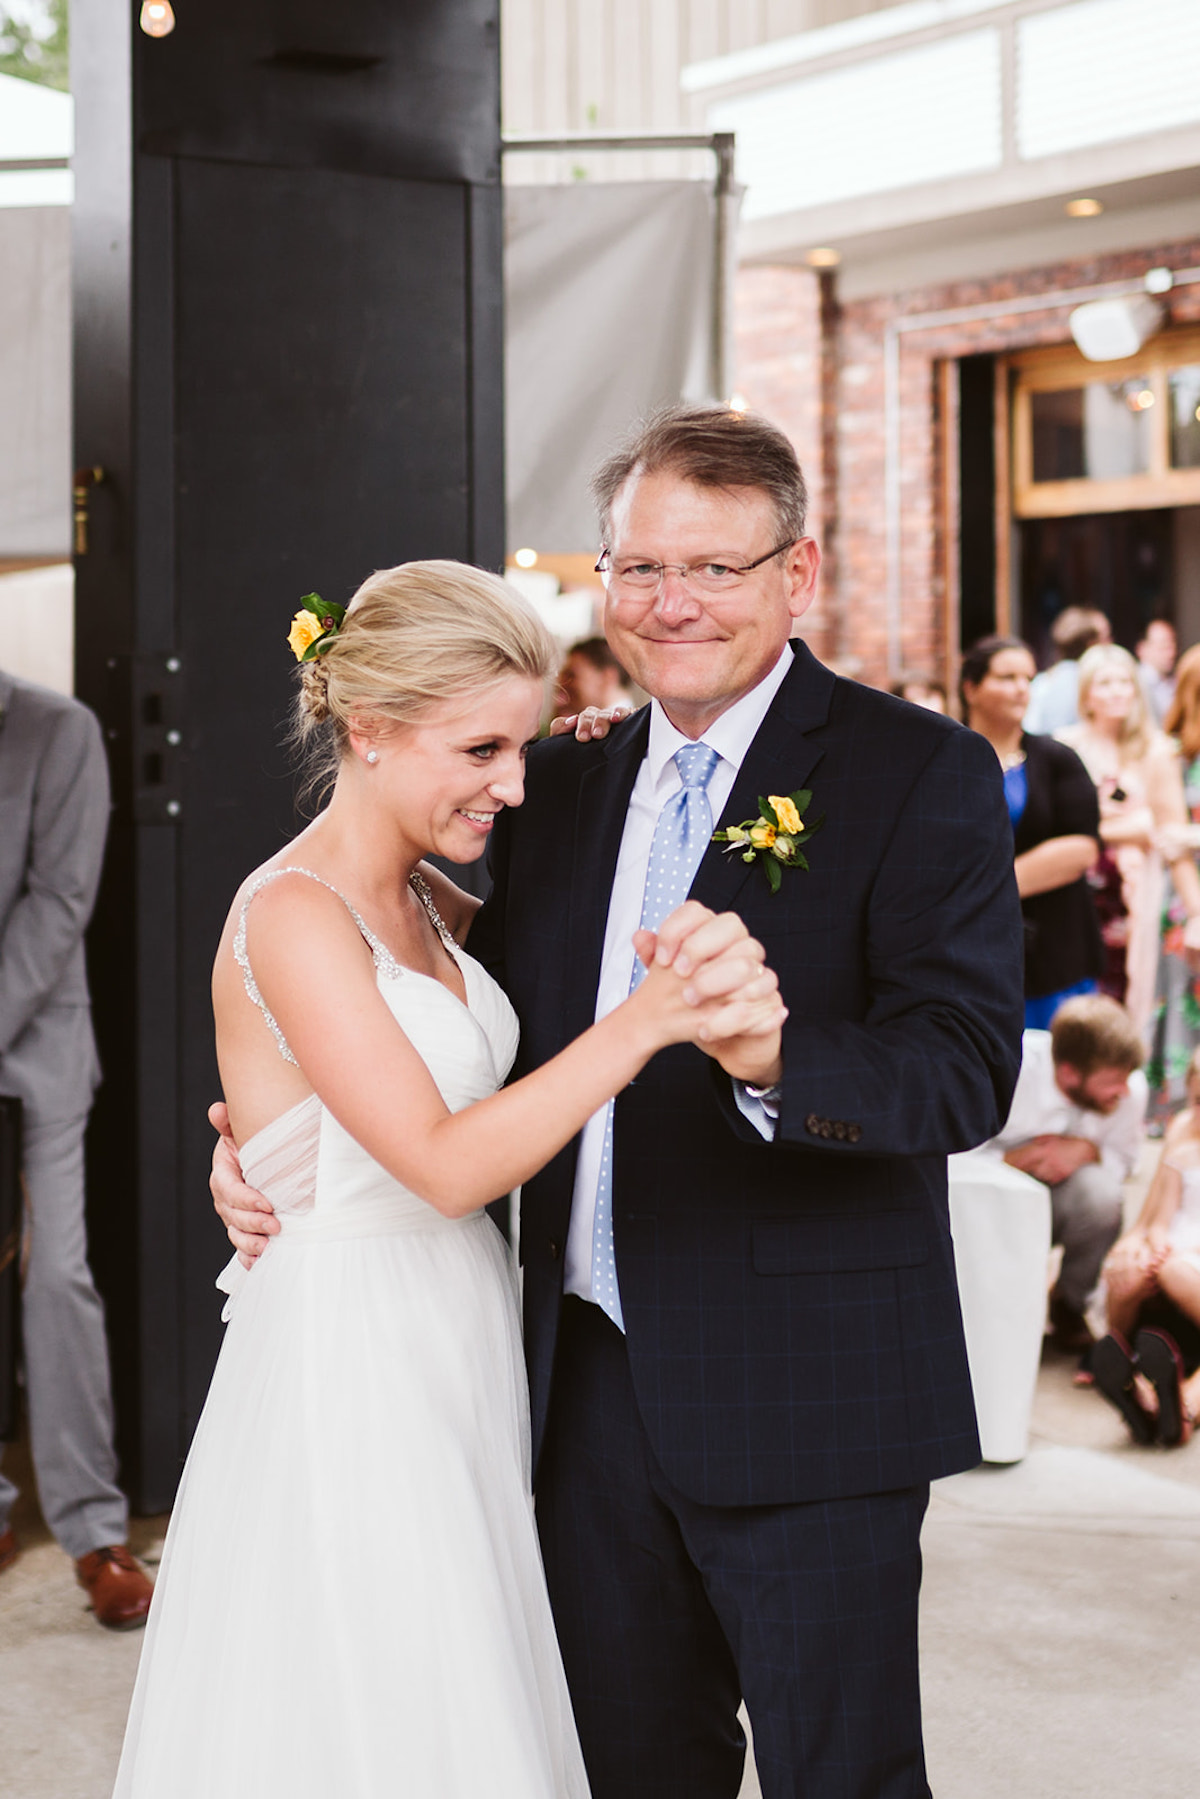 Bride dances with her father, dressed in a dark blue suit and light blue tie.